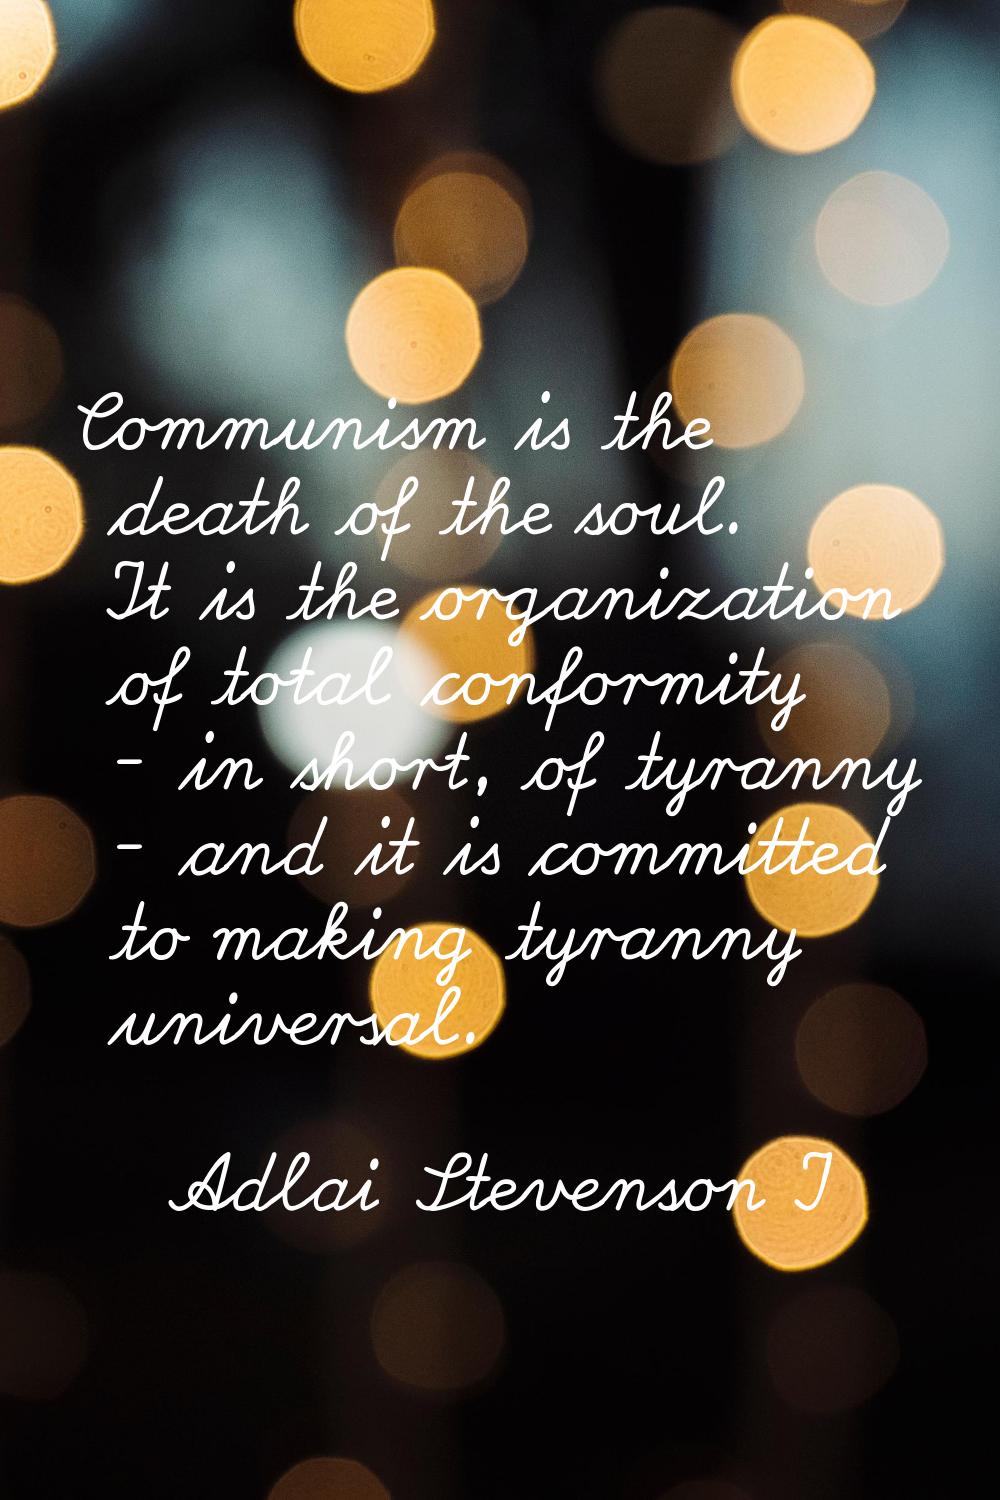 Communism is the death of the soul. It is the organization of total conformity - in short, of tyran